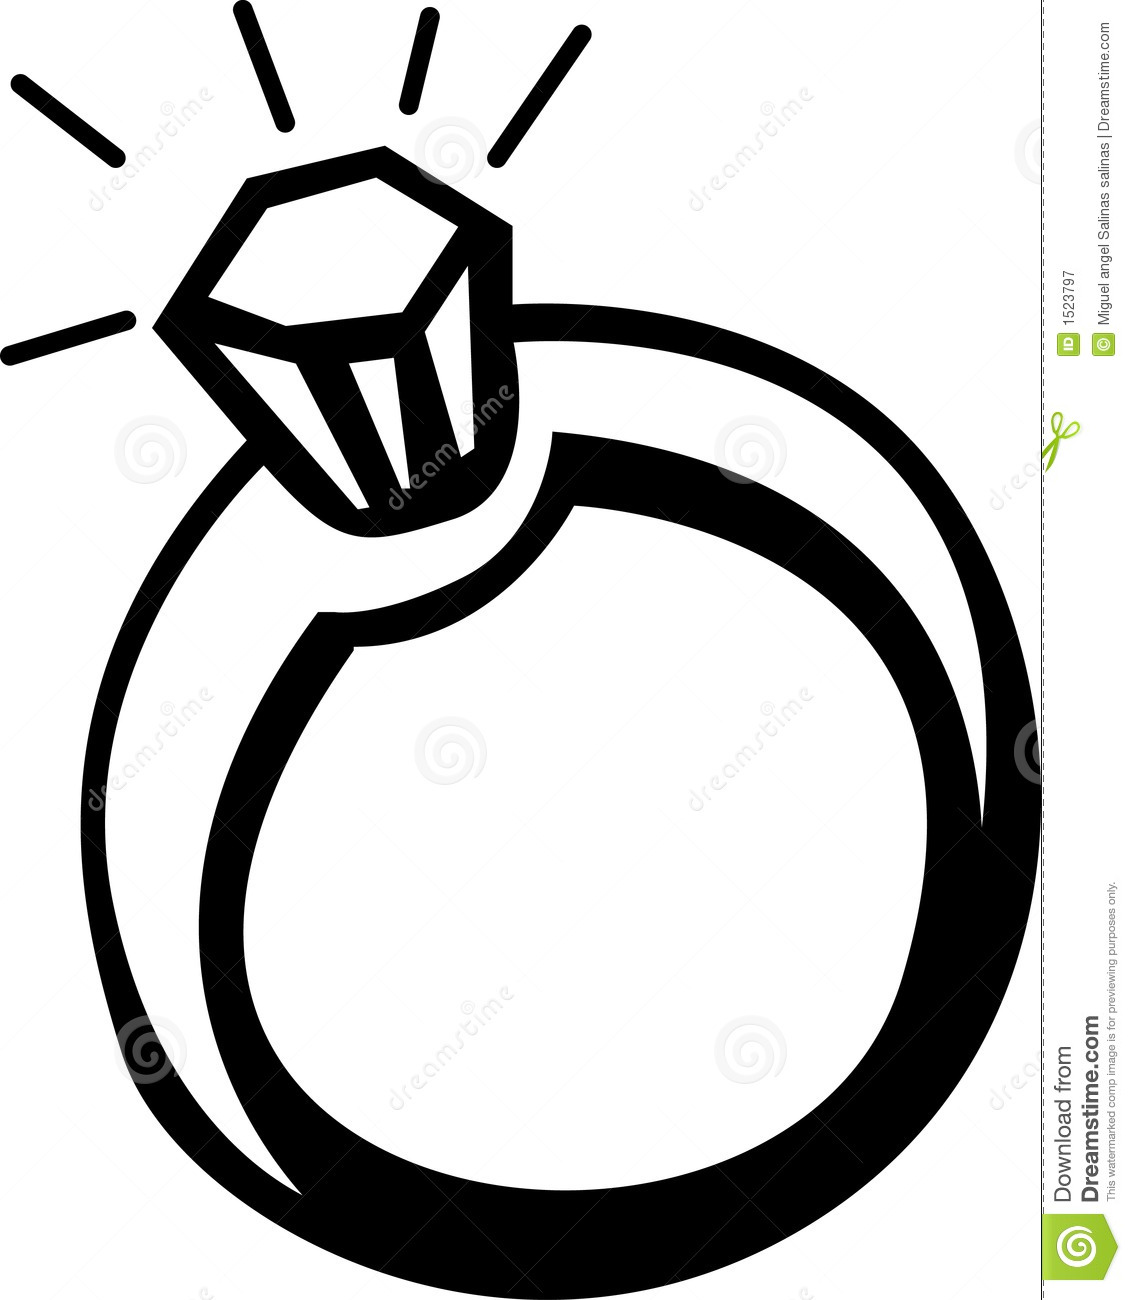     Ring Clipart Black And White   Clipart Panda   Free Clipart Images